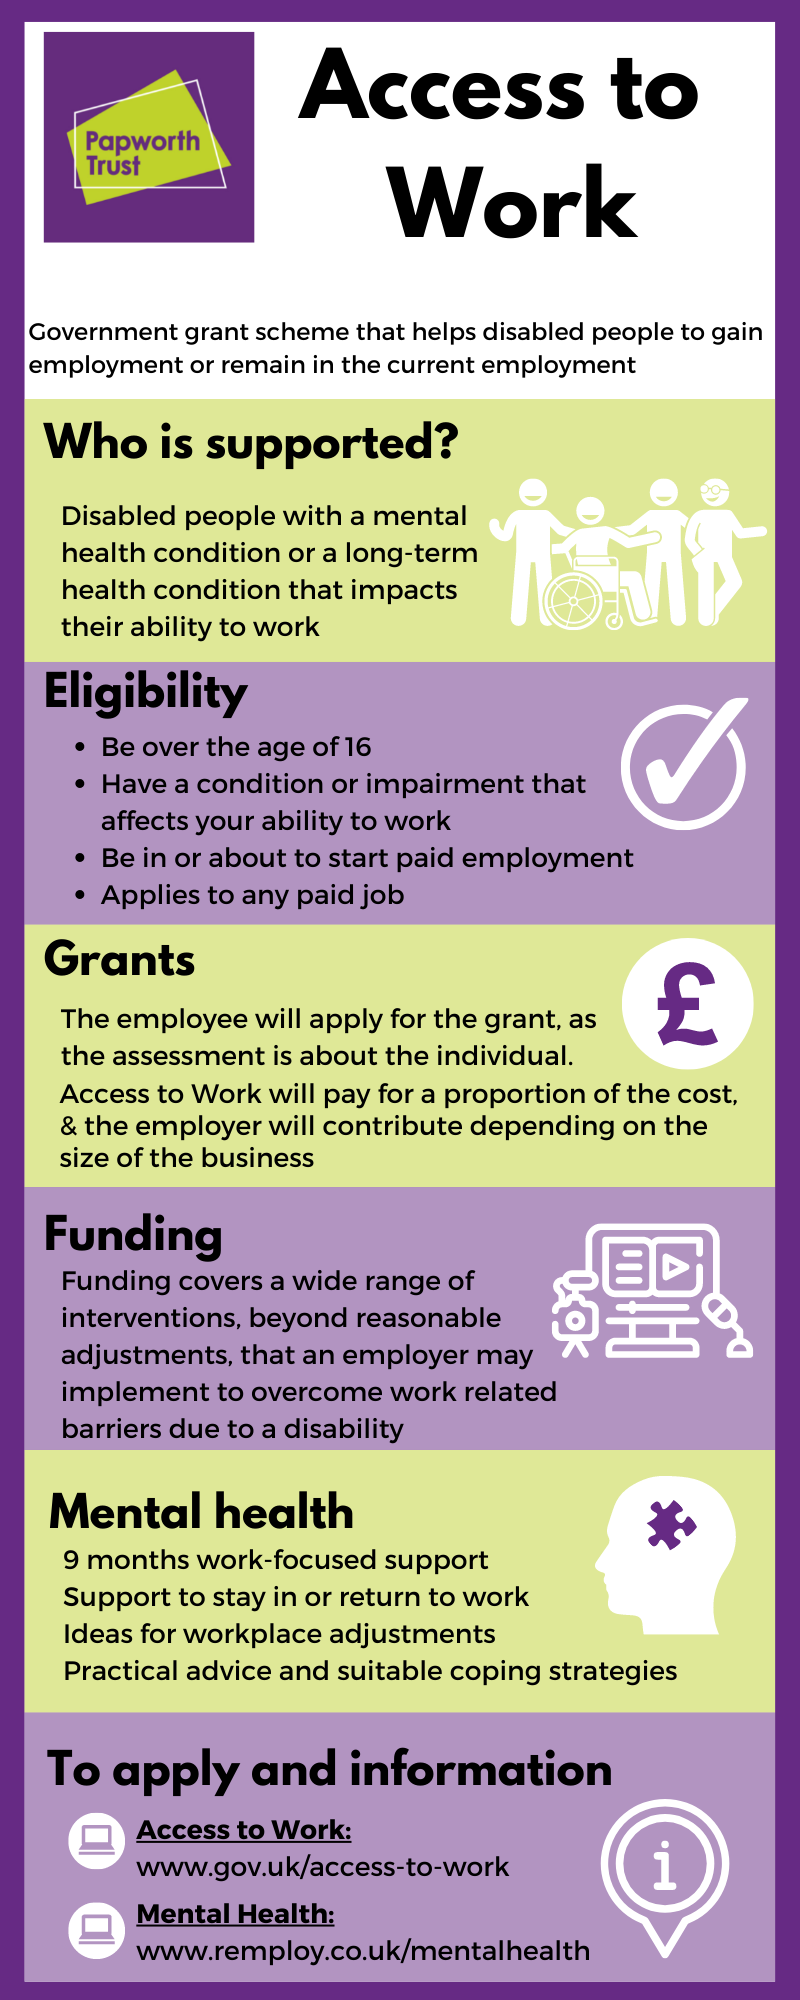 Access to work infographic